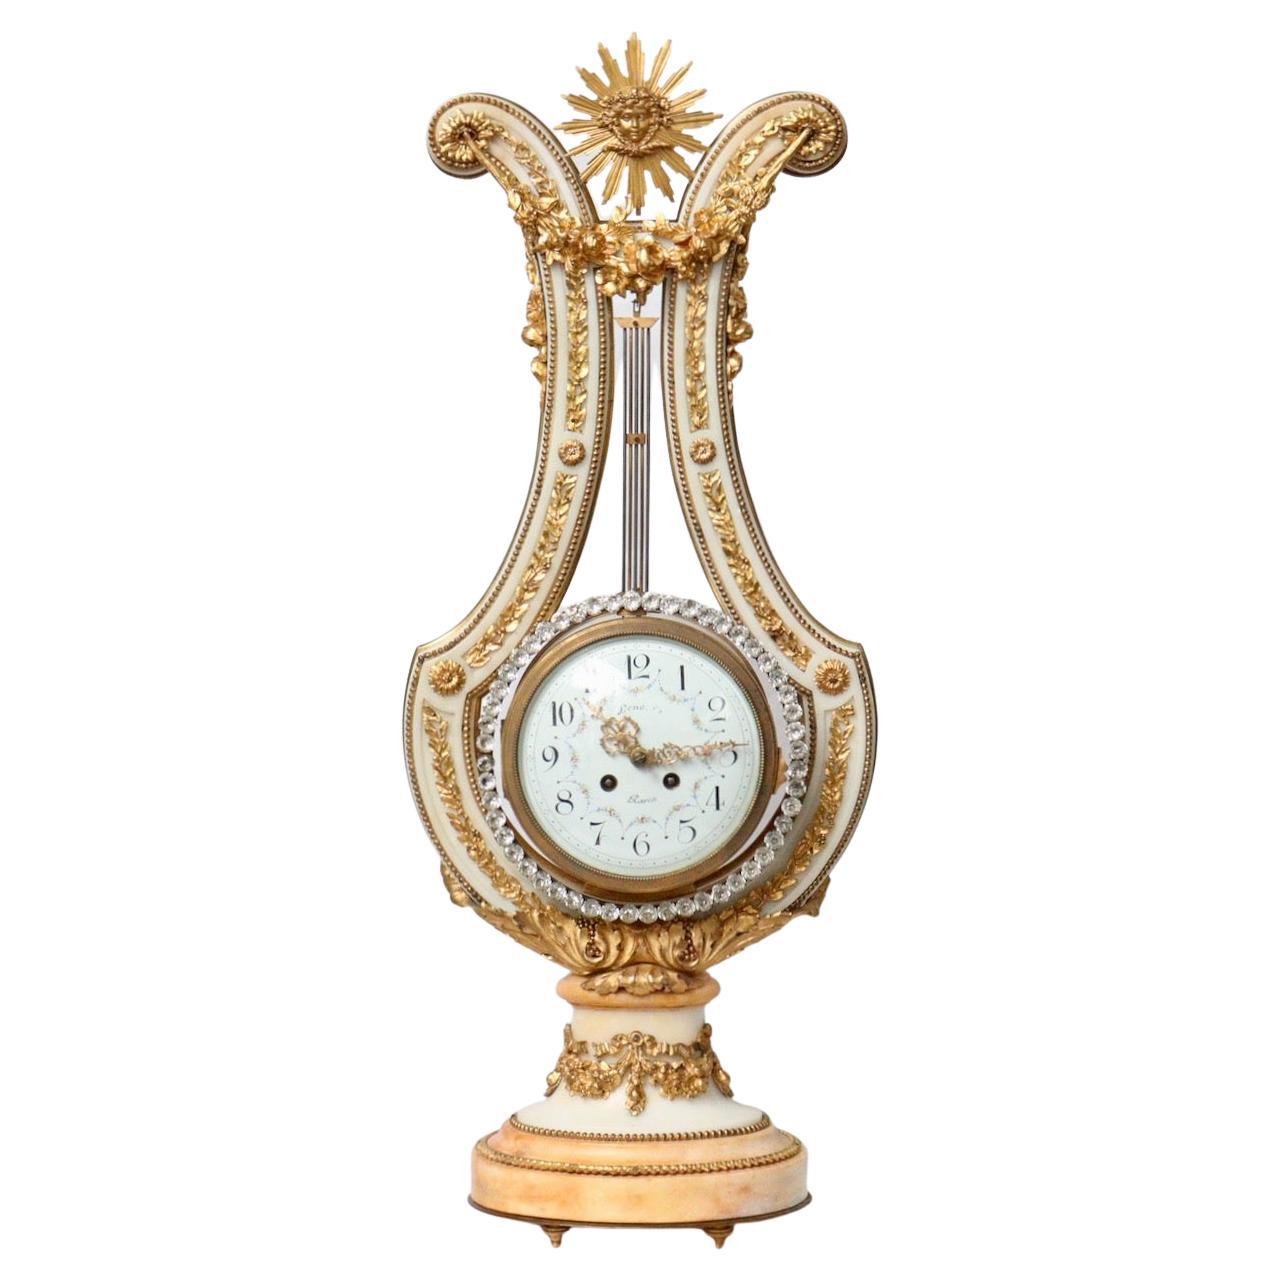 An impressive French 19th century Neoclassical Lyre-form clock with jeweled pendulum.

Amazing quality white and yellow marble 19th century French Lyre-Form clock mounted all over with gilt bronze leaves and swags, draping garlands and Acanthus